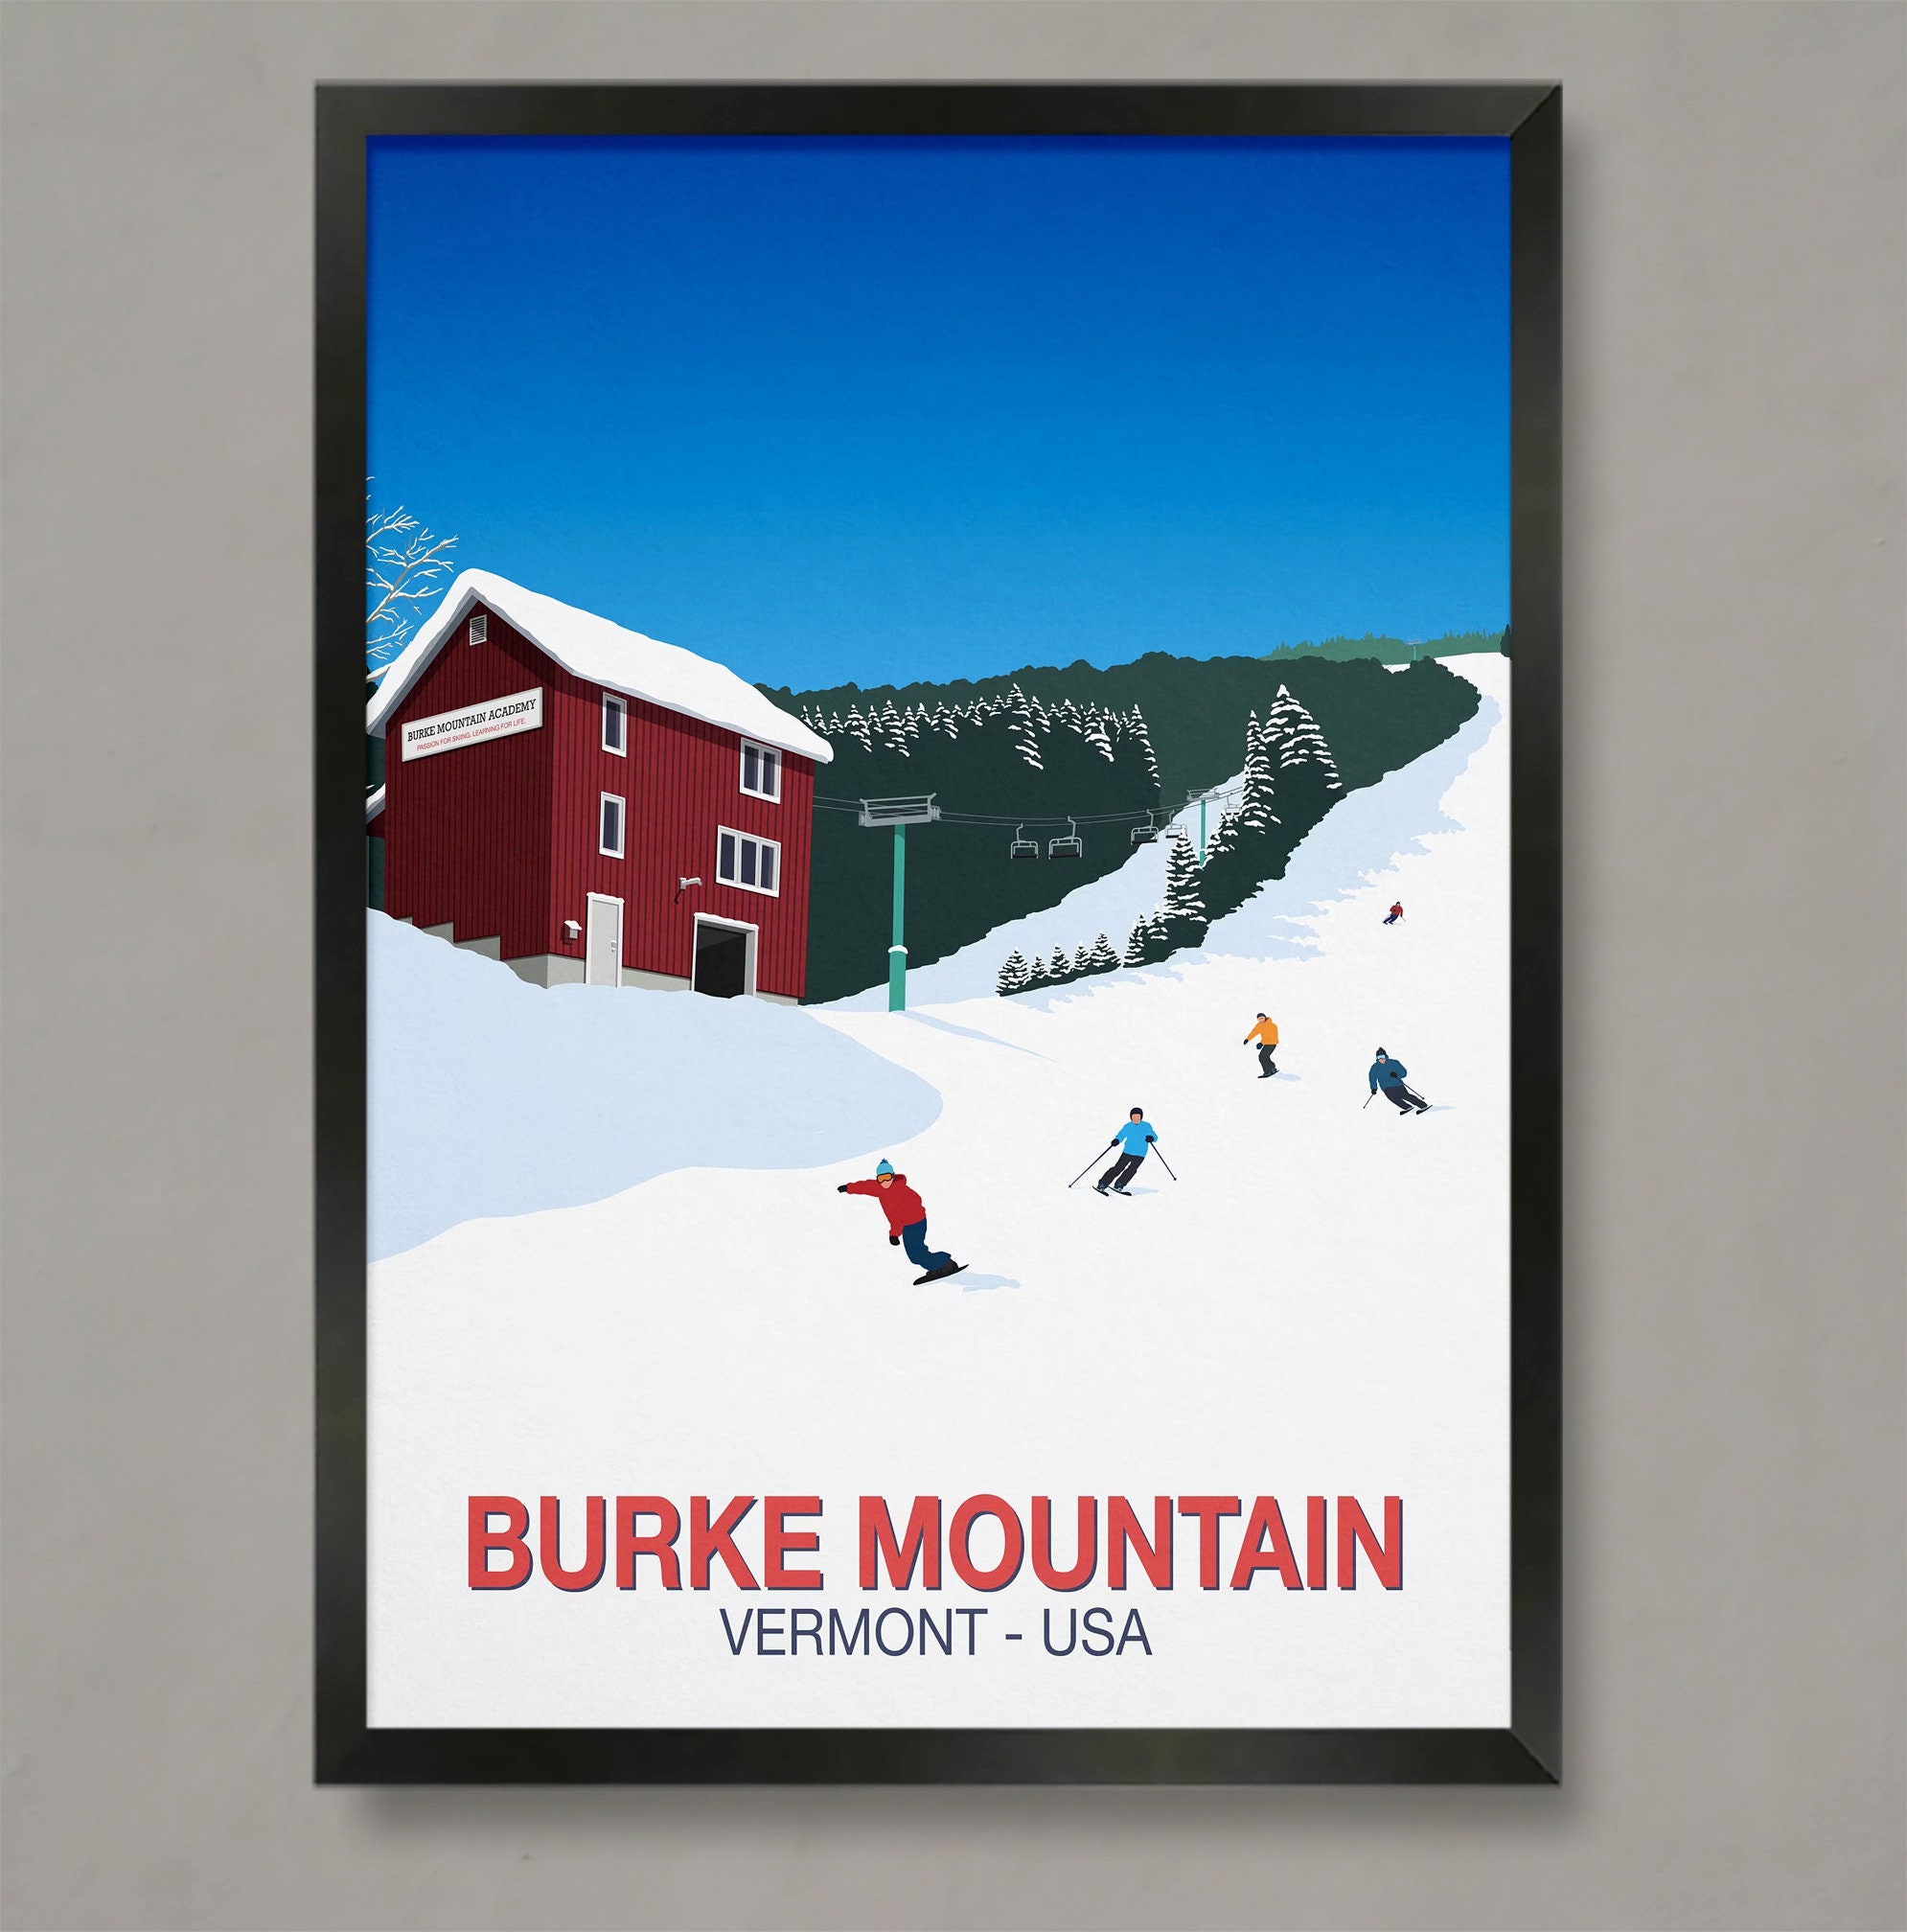 50 Best Ski & Snowboard Resorts Scratch off Poster Ski Poster Ski Decor Ski  Print A Great Gift for Skiers and Snowboarders 